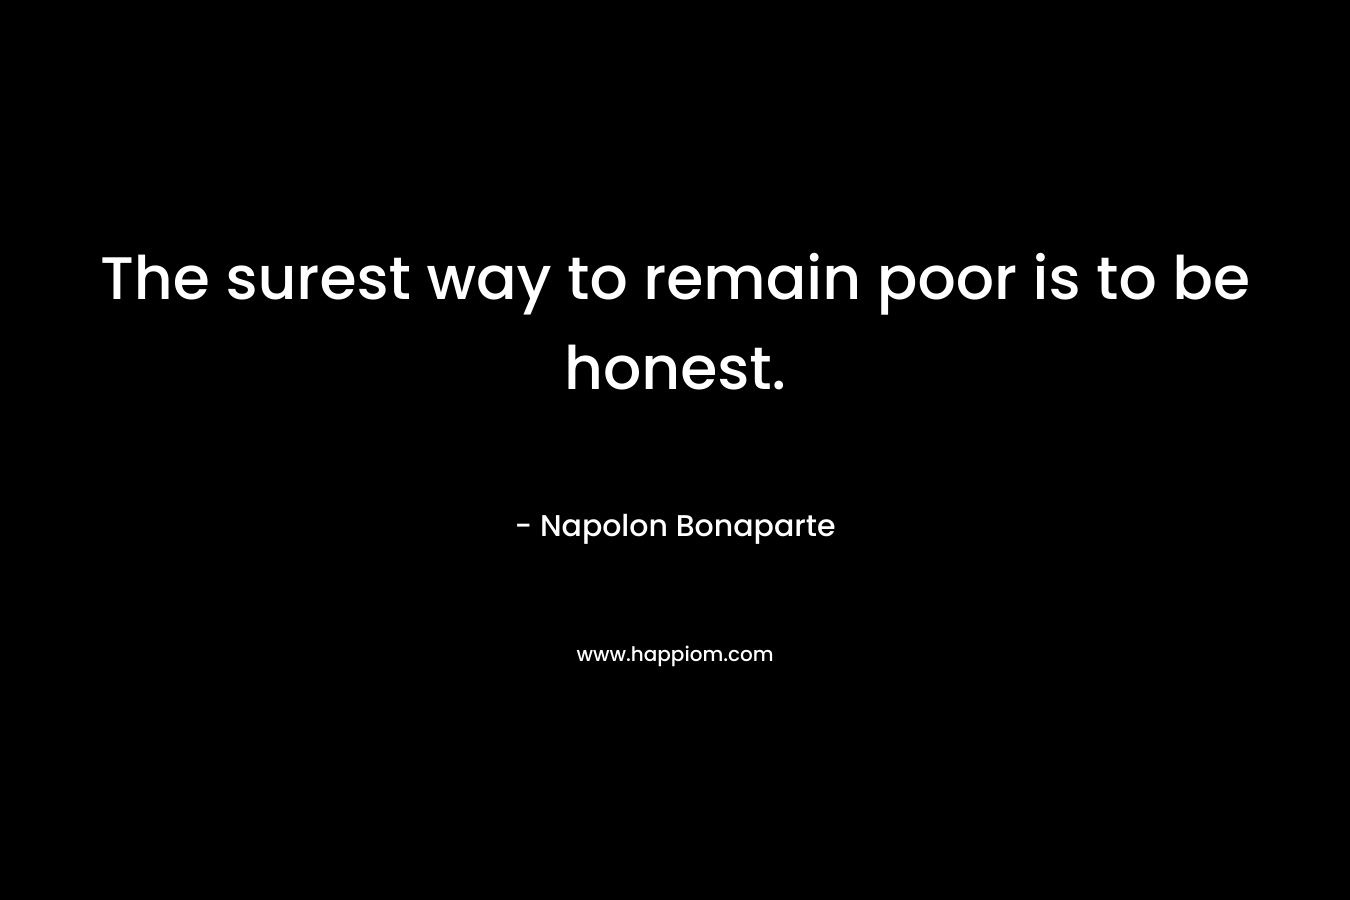 The surest way to remain poor is to be honest.